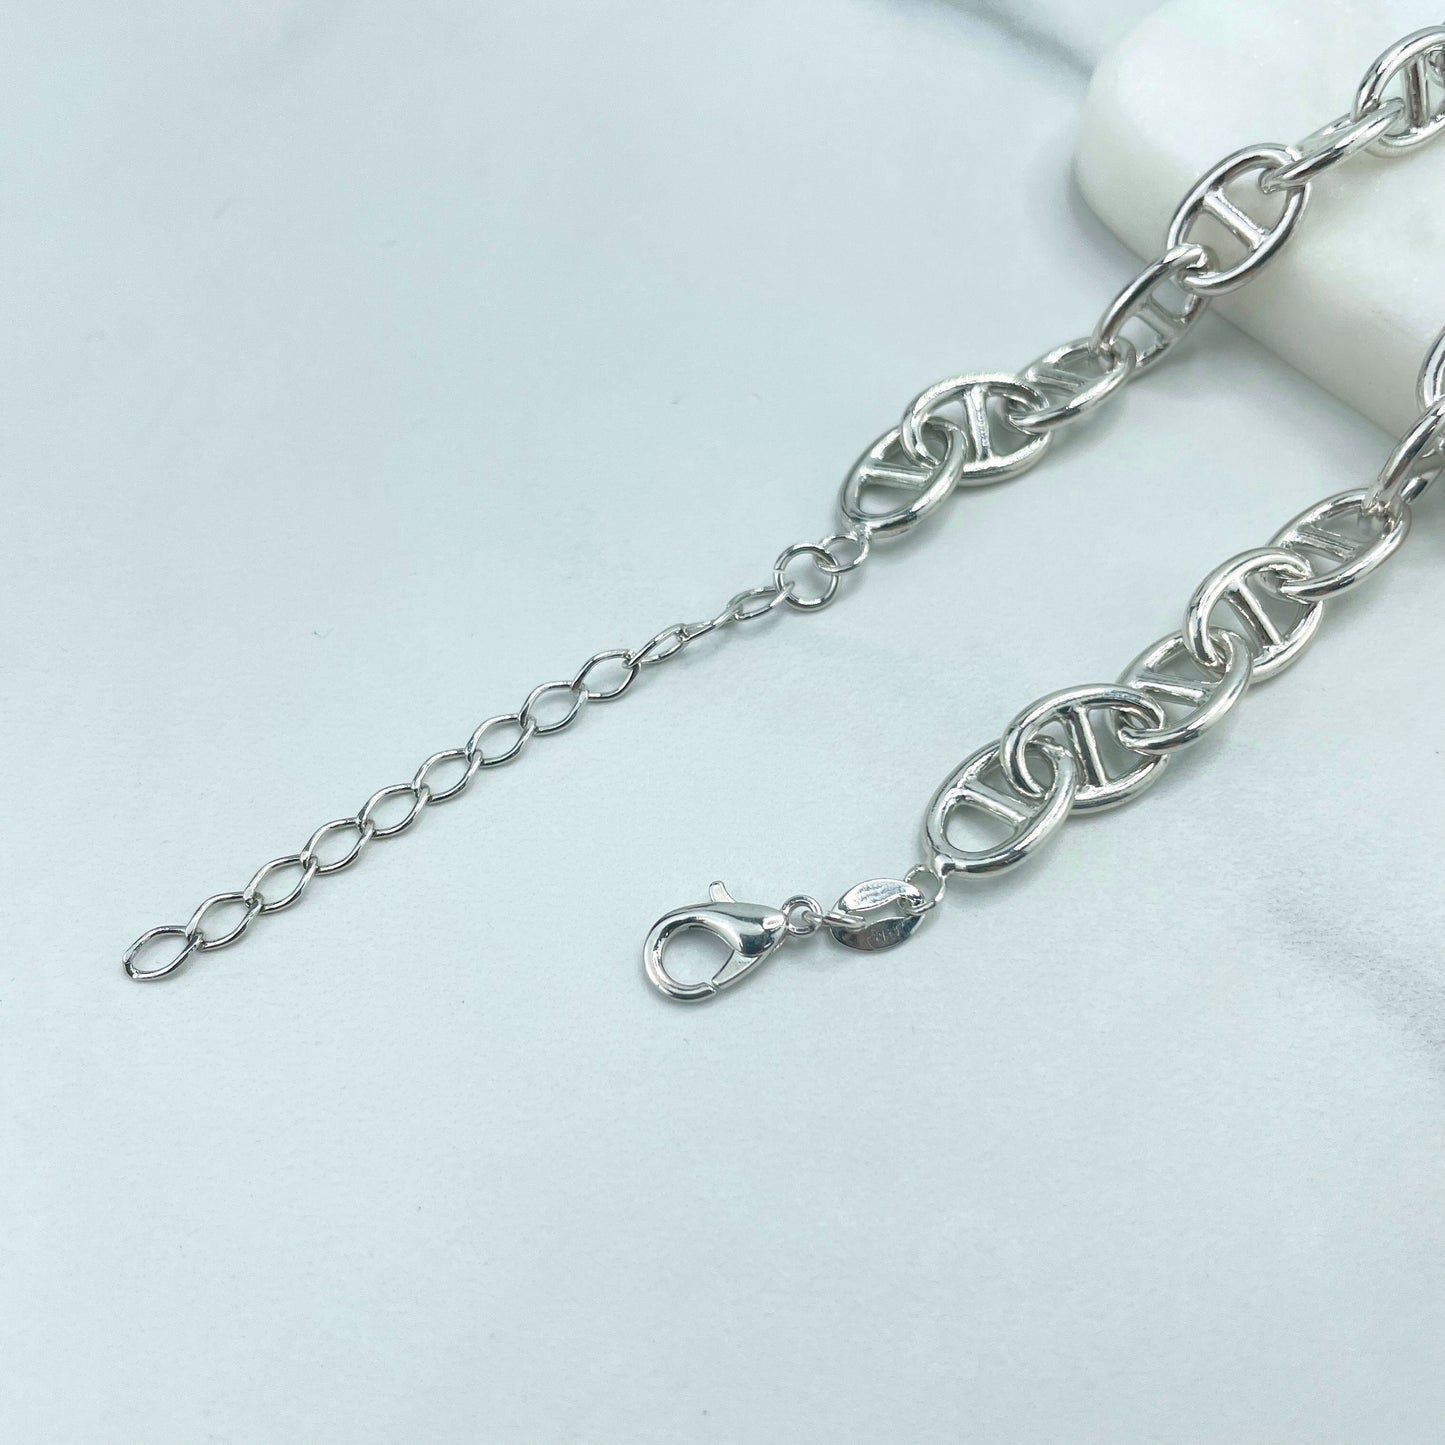 Silver Filled 8mm Specially Mariner Link Chain or Bracelet with Extender, Wholesale Jewelry Making Supplies